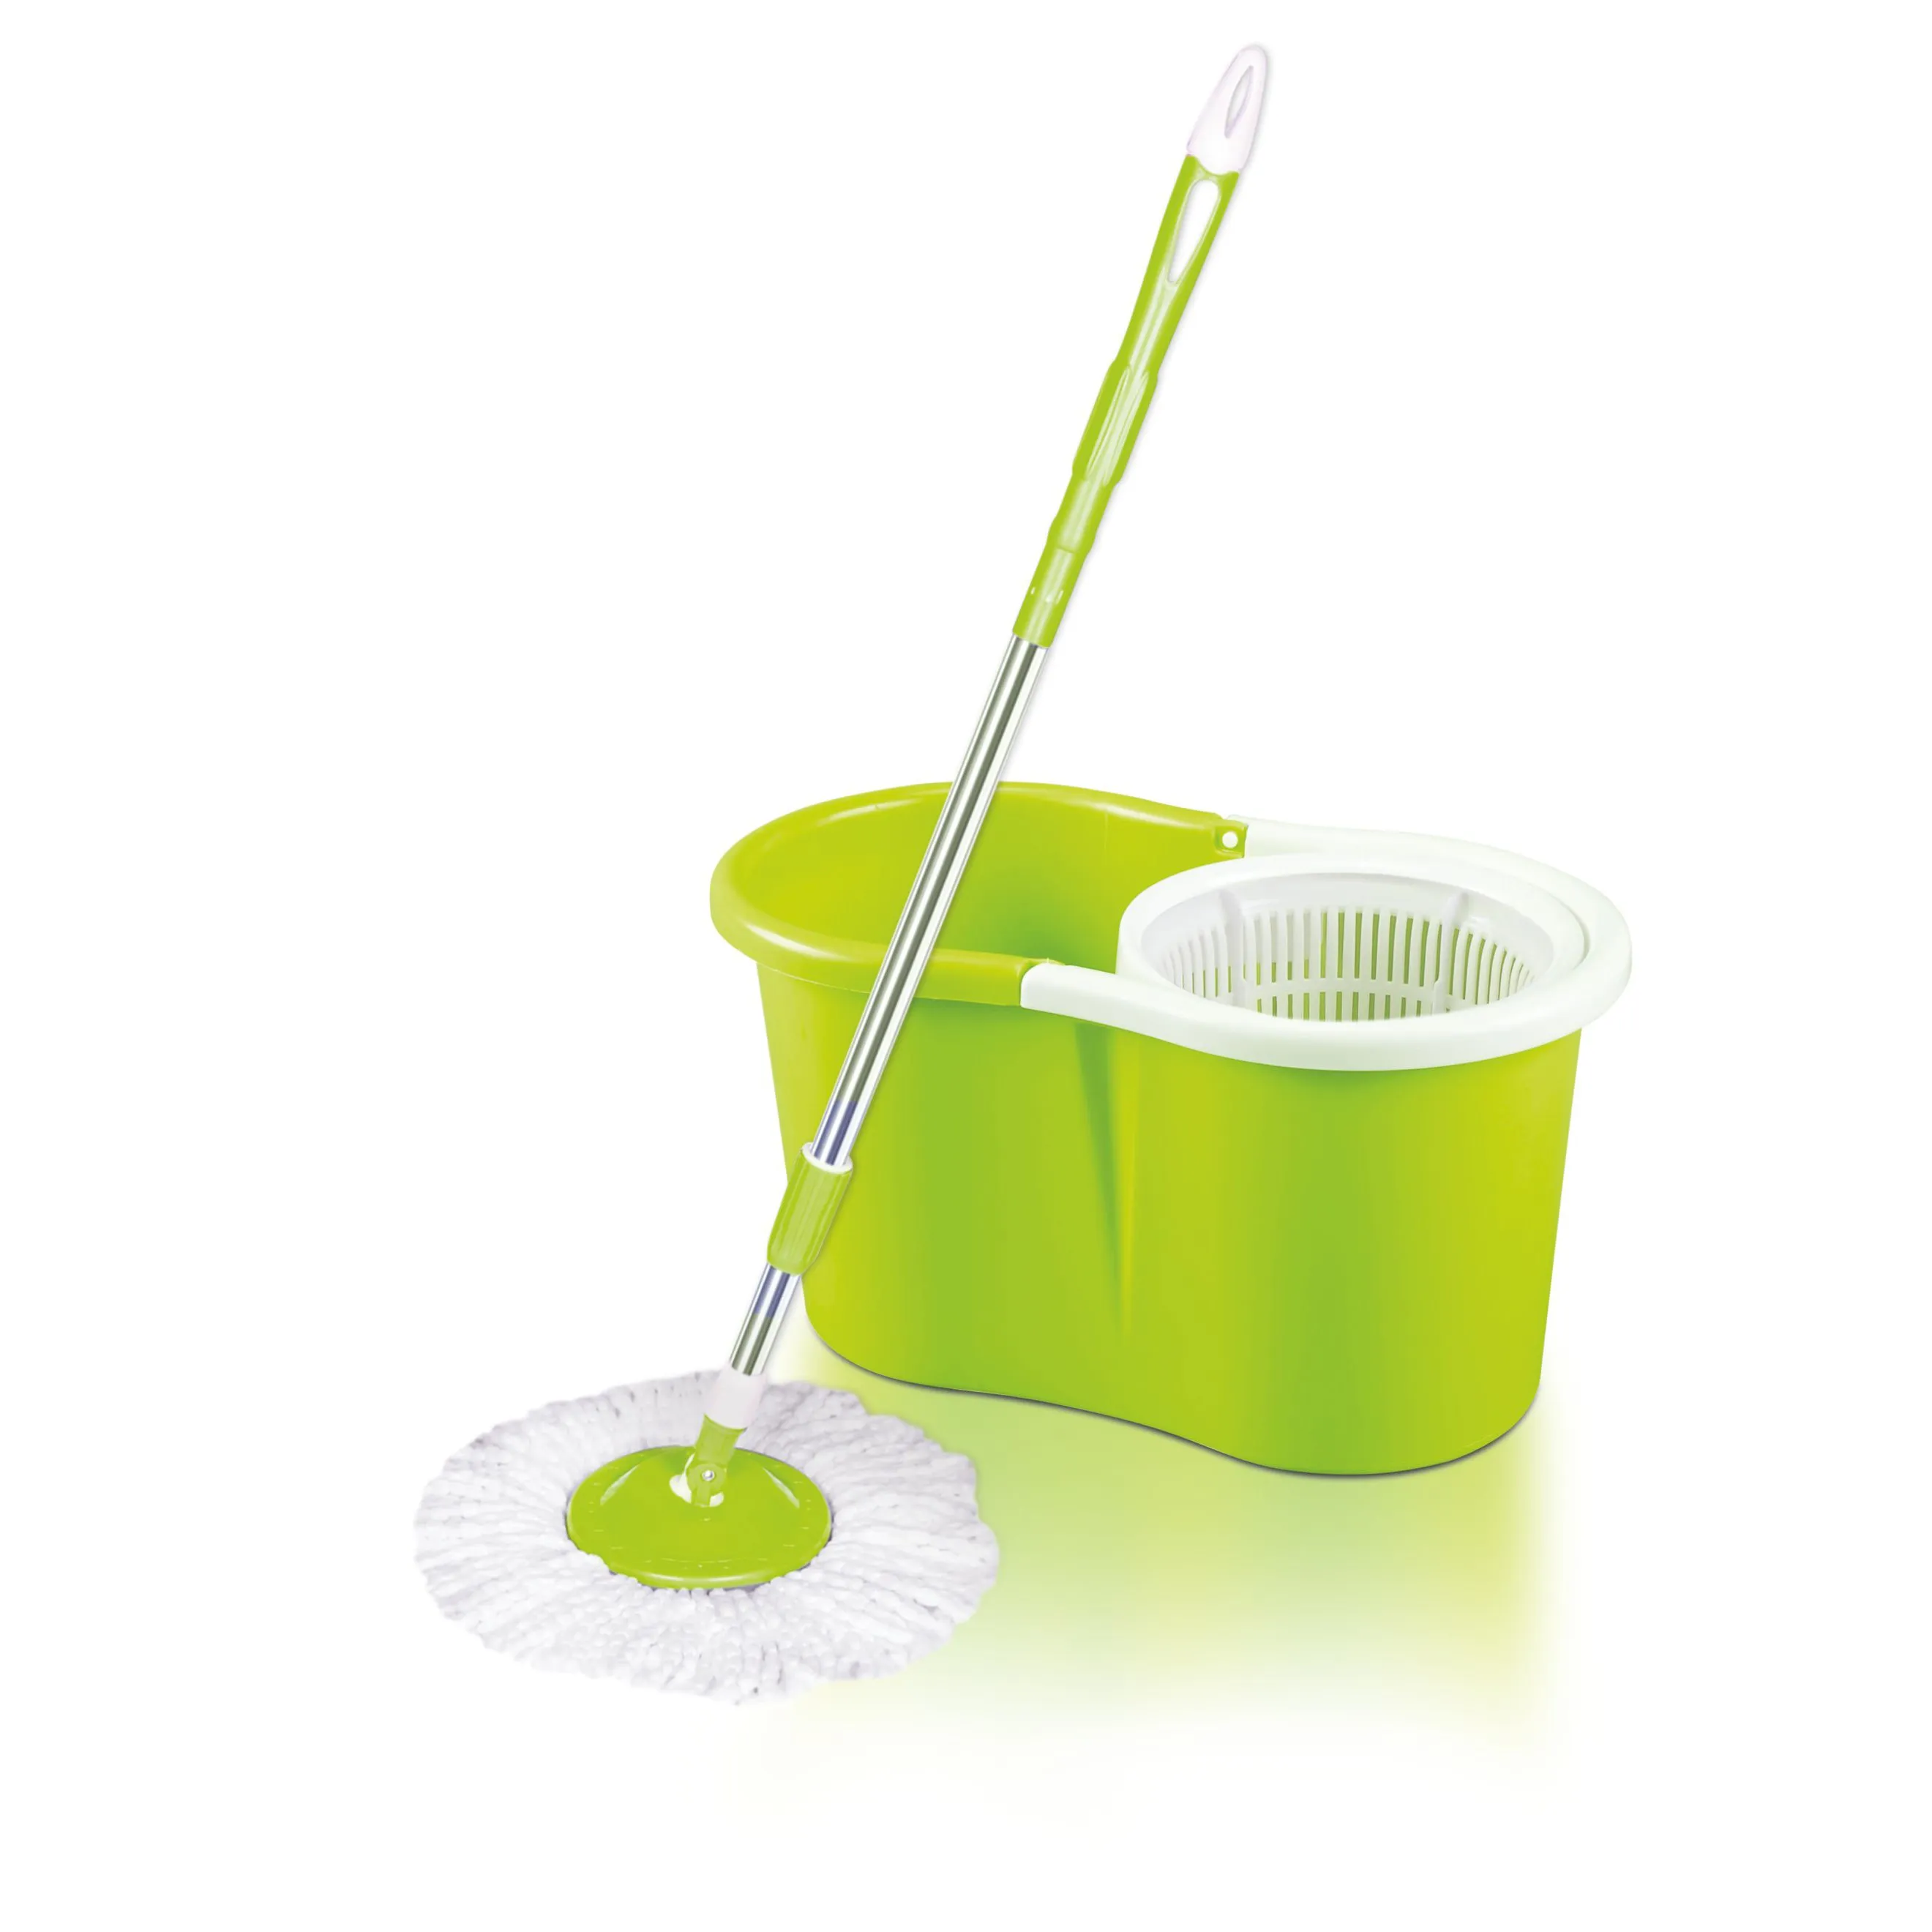 Royalford  Easy Spin Mop & Bucket Set - 360 Degree Spinning Mop Bucket Home Cleaner Extended Ergonomic Handle & Easy Wring Dryer Basket for Home Kitchen Floor Cleaning & More